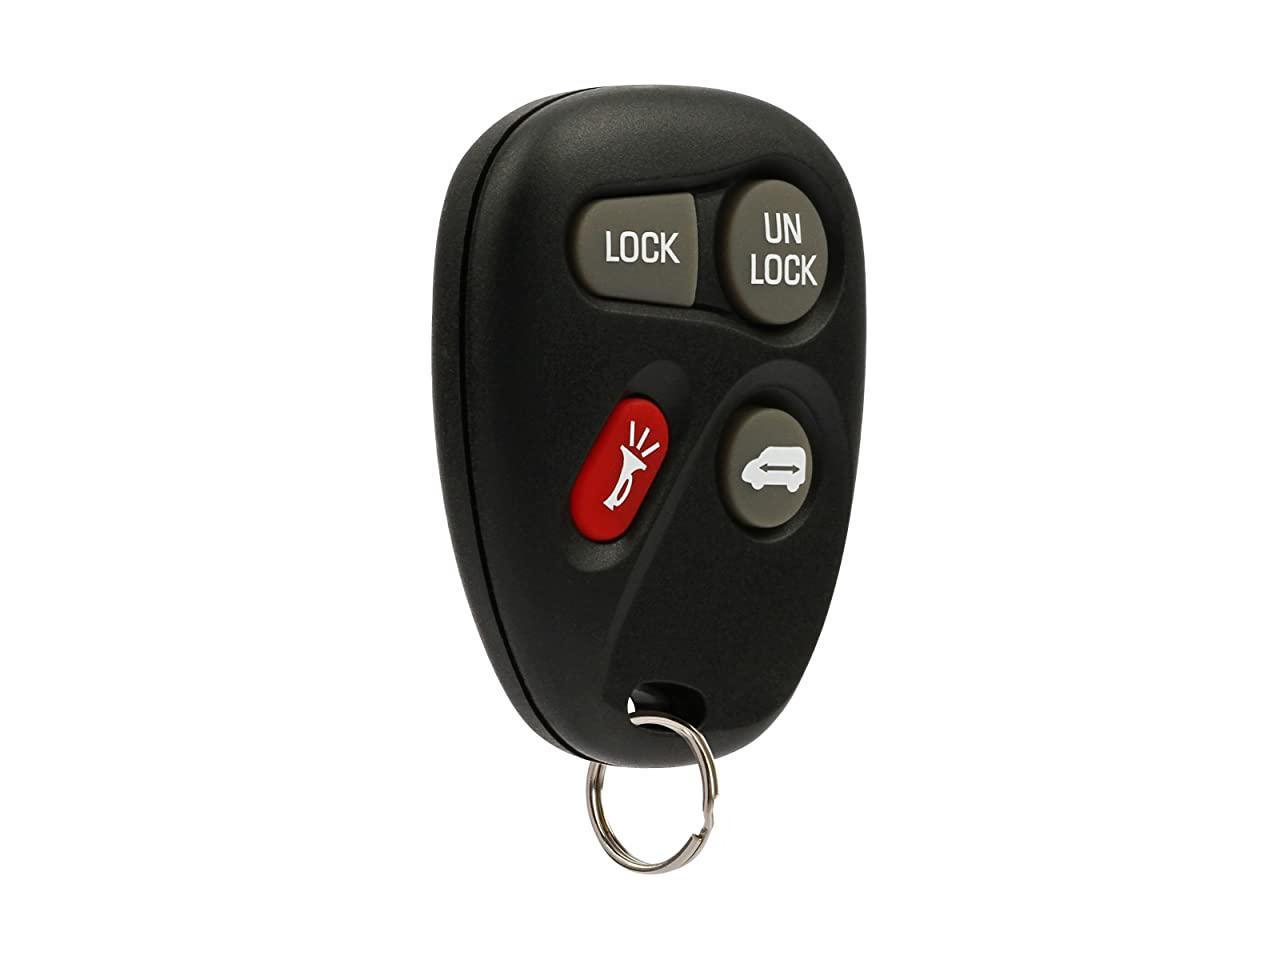 Key Fob Keyless Entry Remote fits Chevy Venture/Oldsmobile Silhouette/Pontiac Montana and Trans Sport 1997 1998 1999 200 2001 Set of 2 ABO0204T, 10245953 